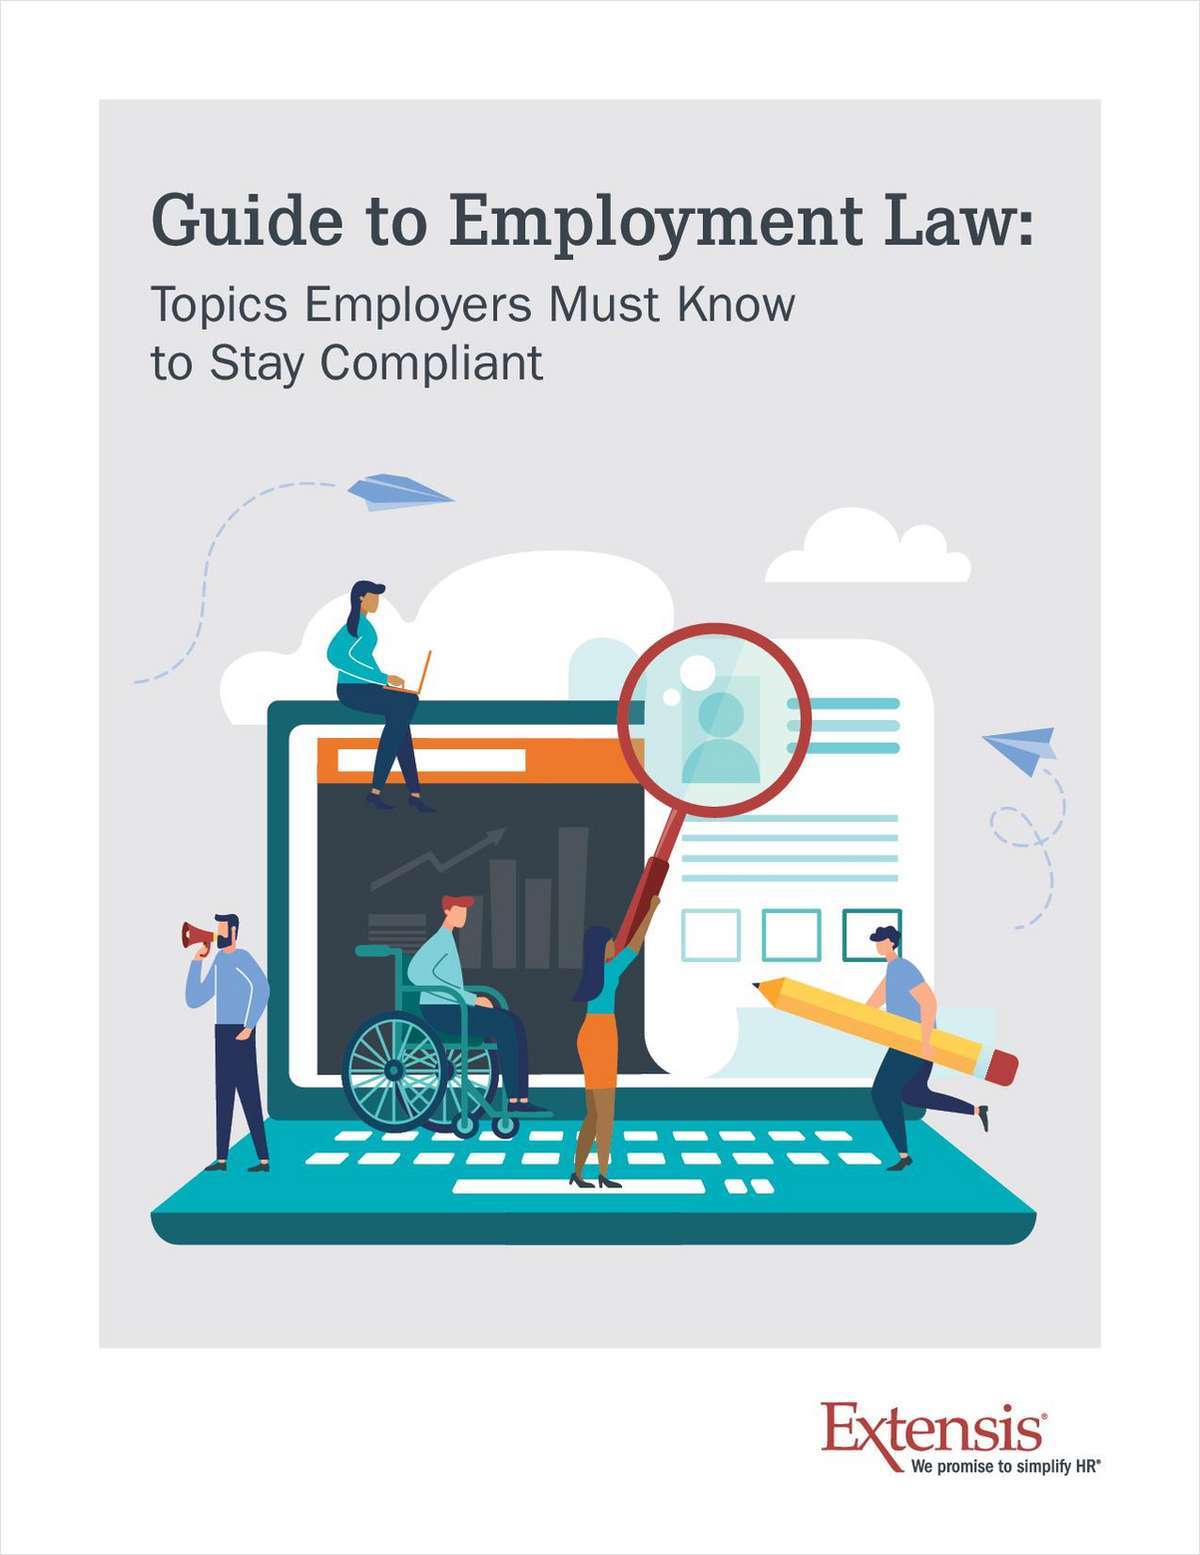 Guide to Employment Law: Topics Employers Must Know to Stay Compliant